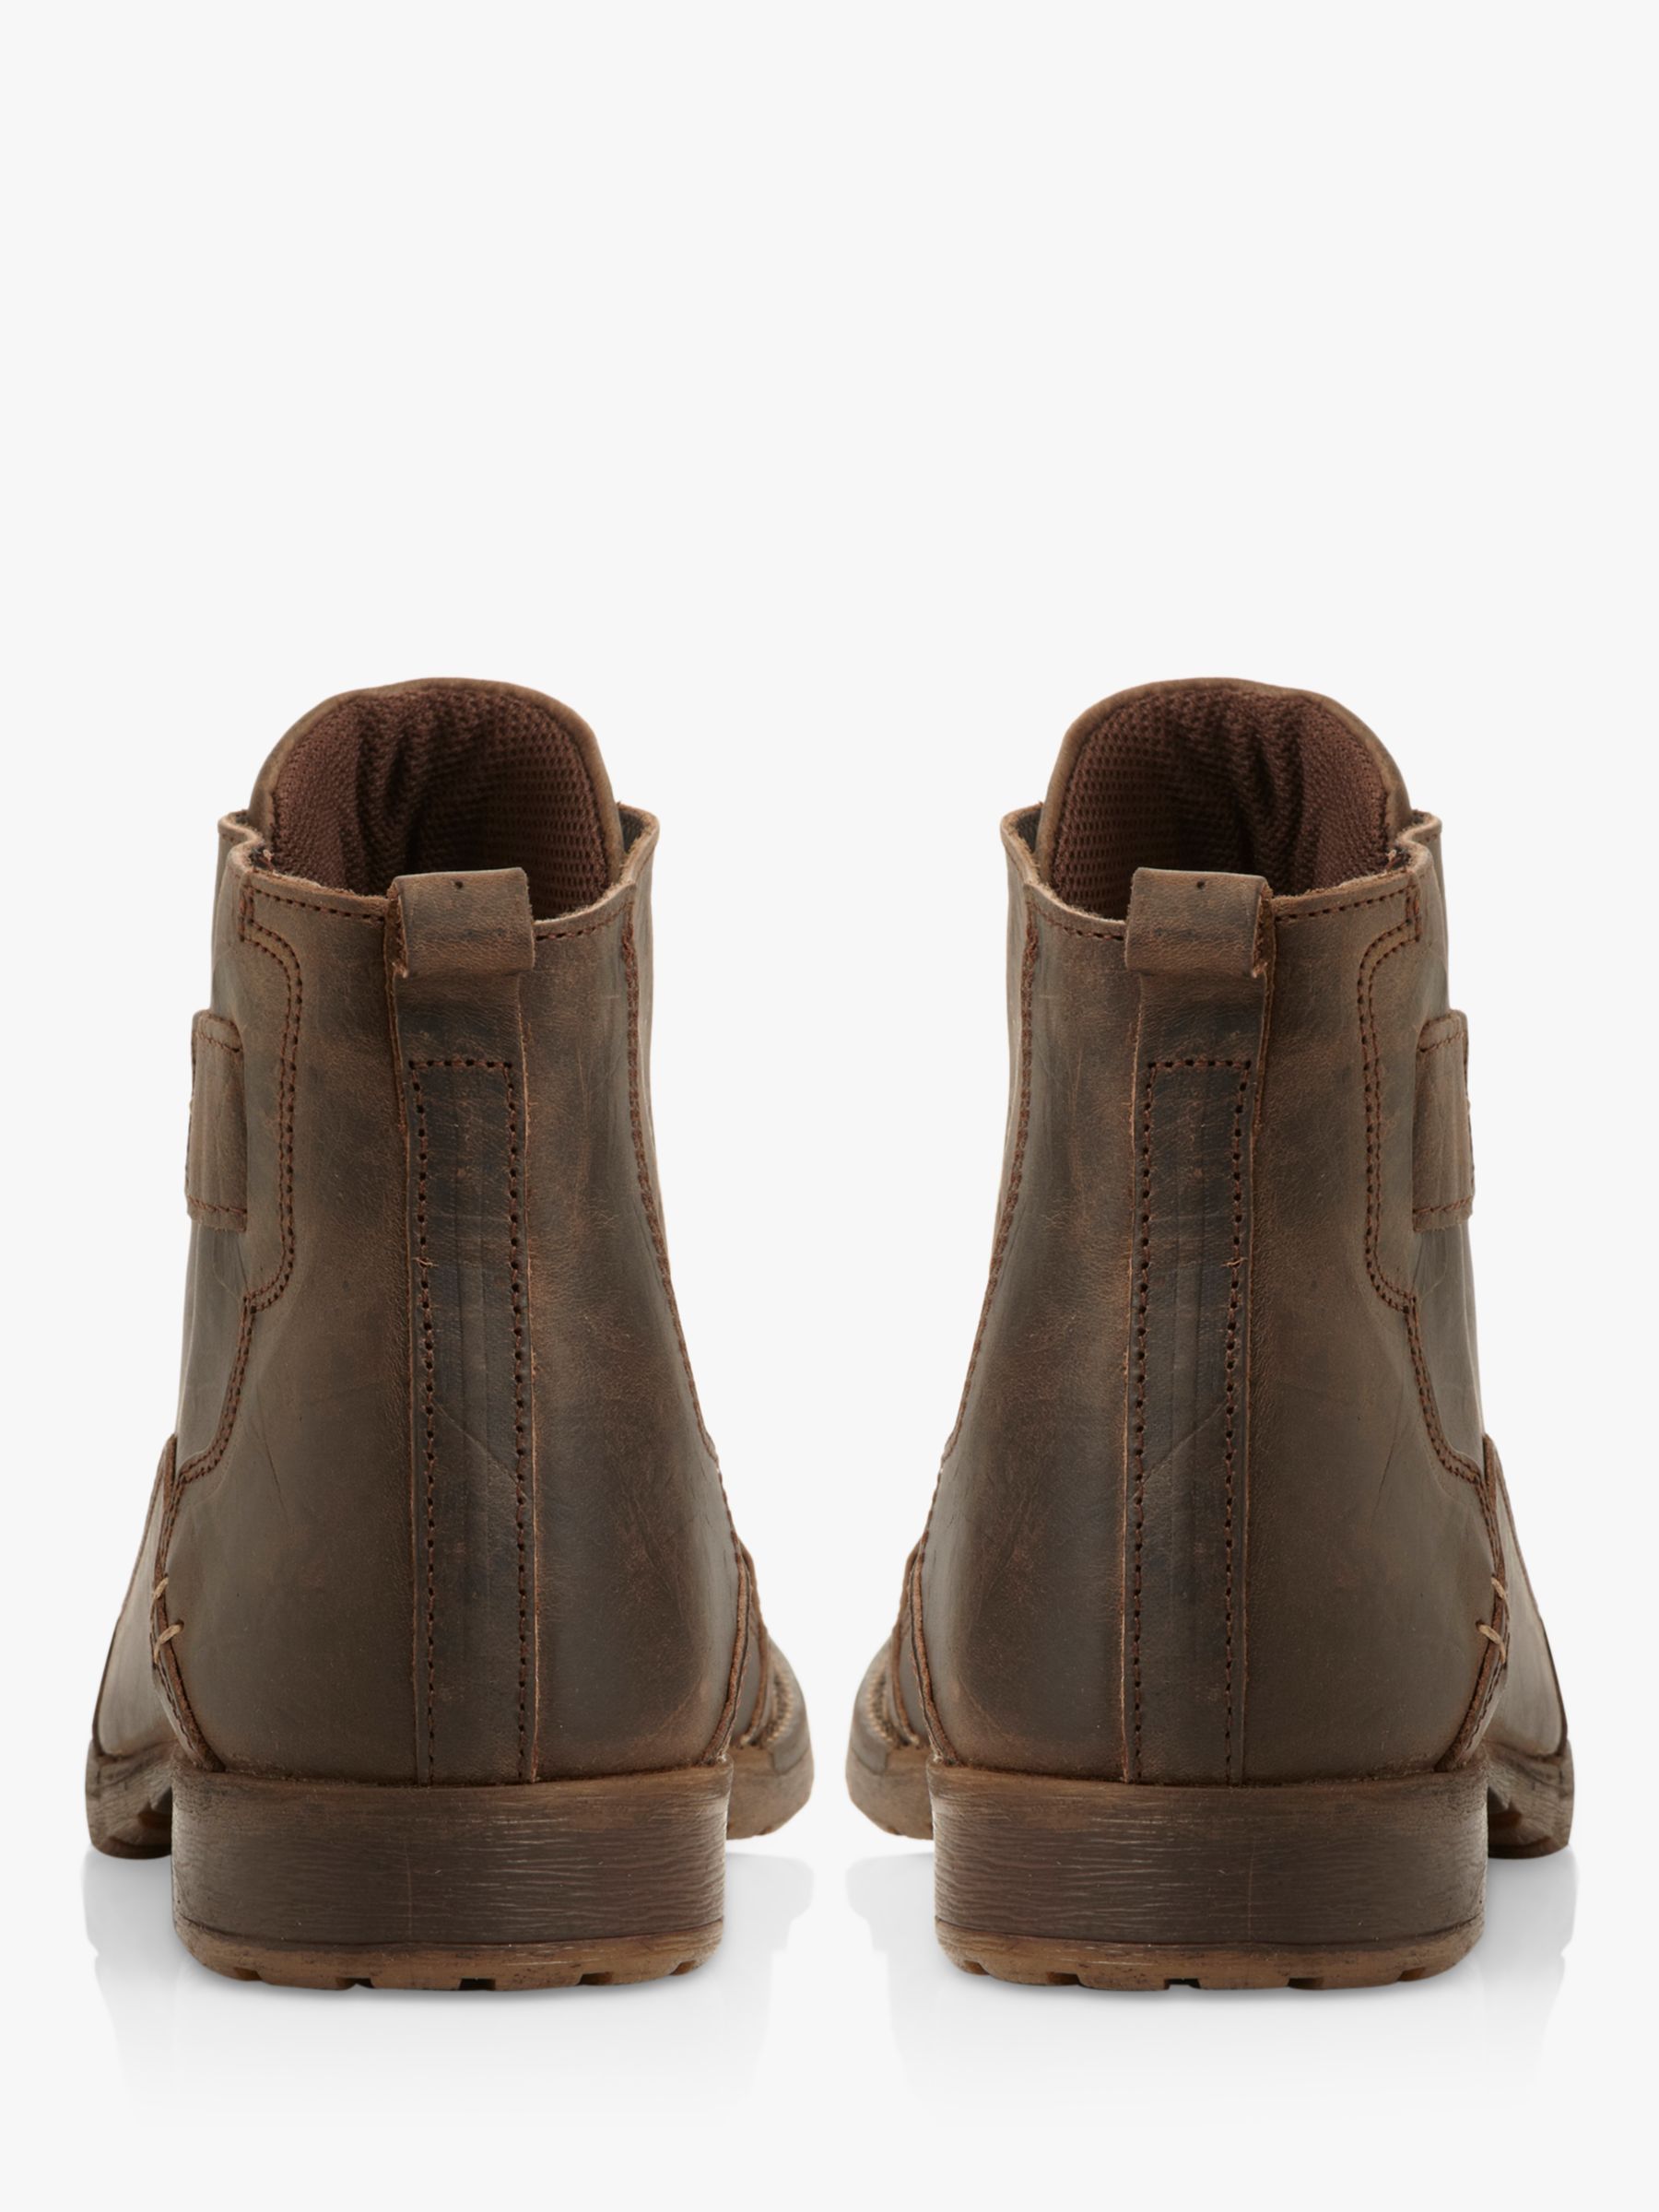 Buy Dune Simon Leather Boots Online at johnlewis.com